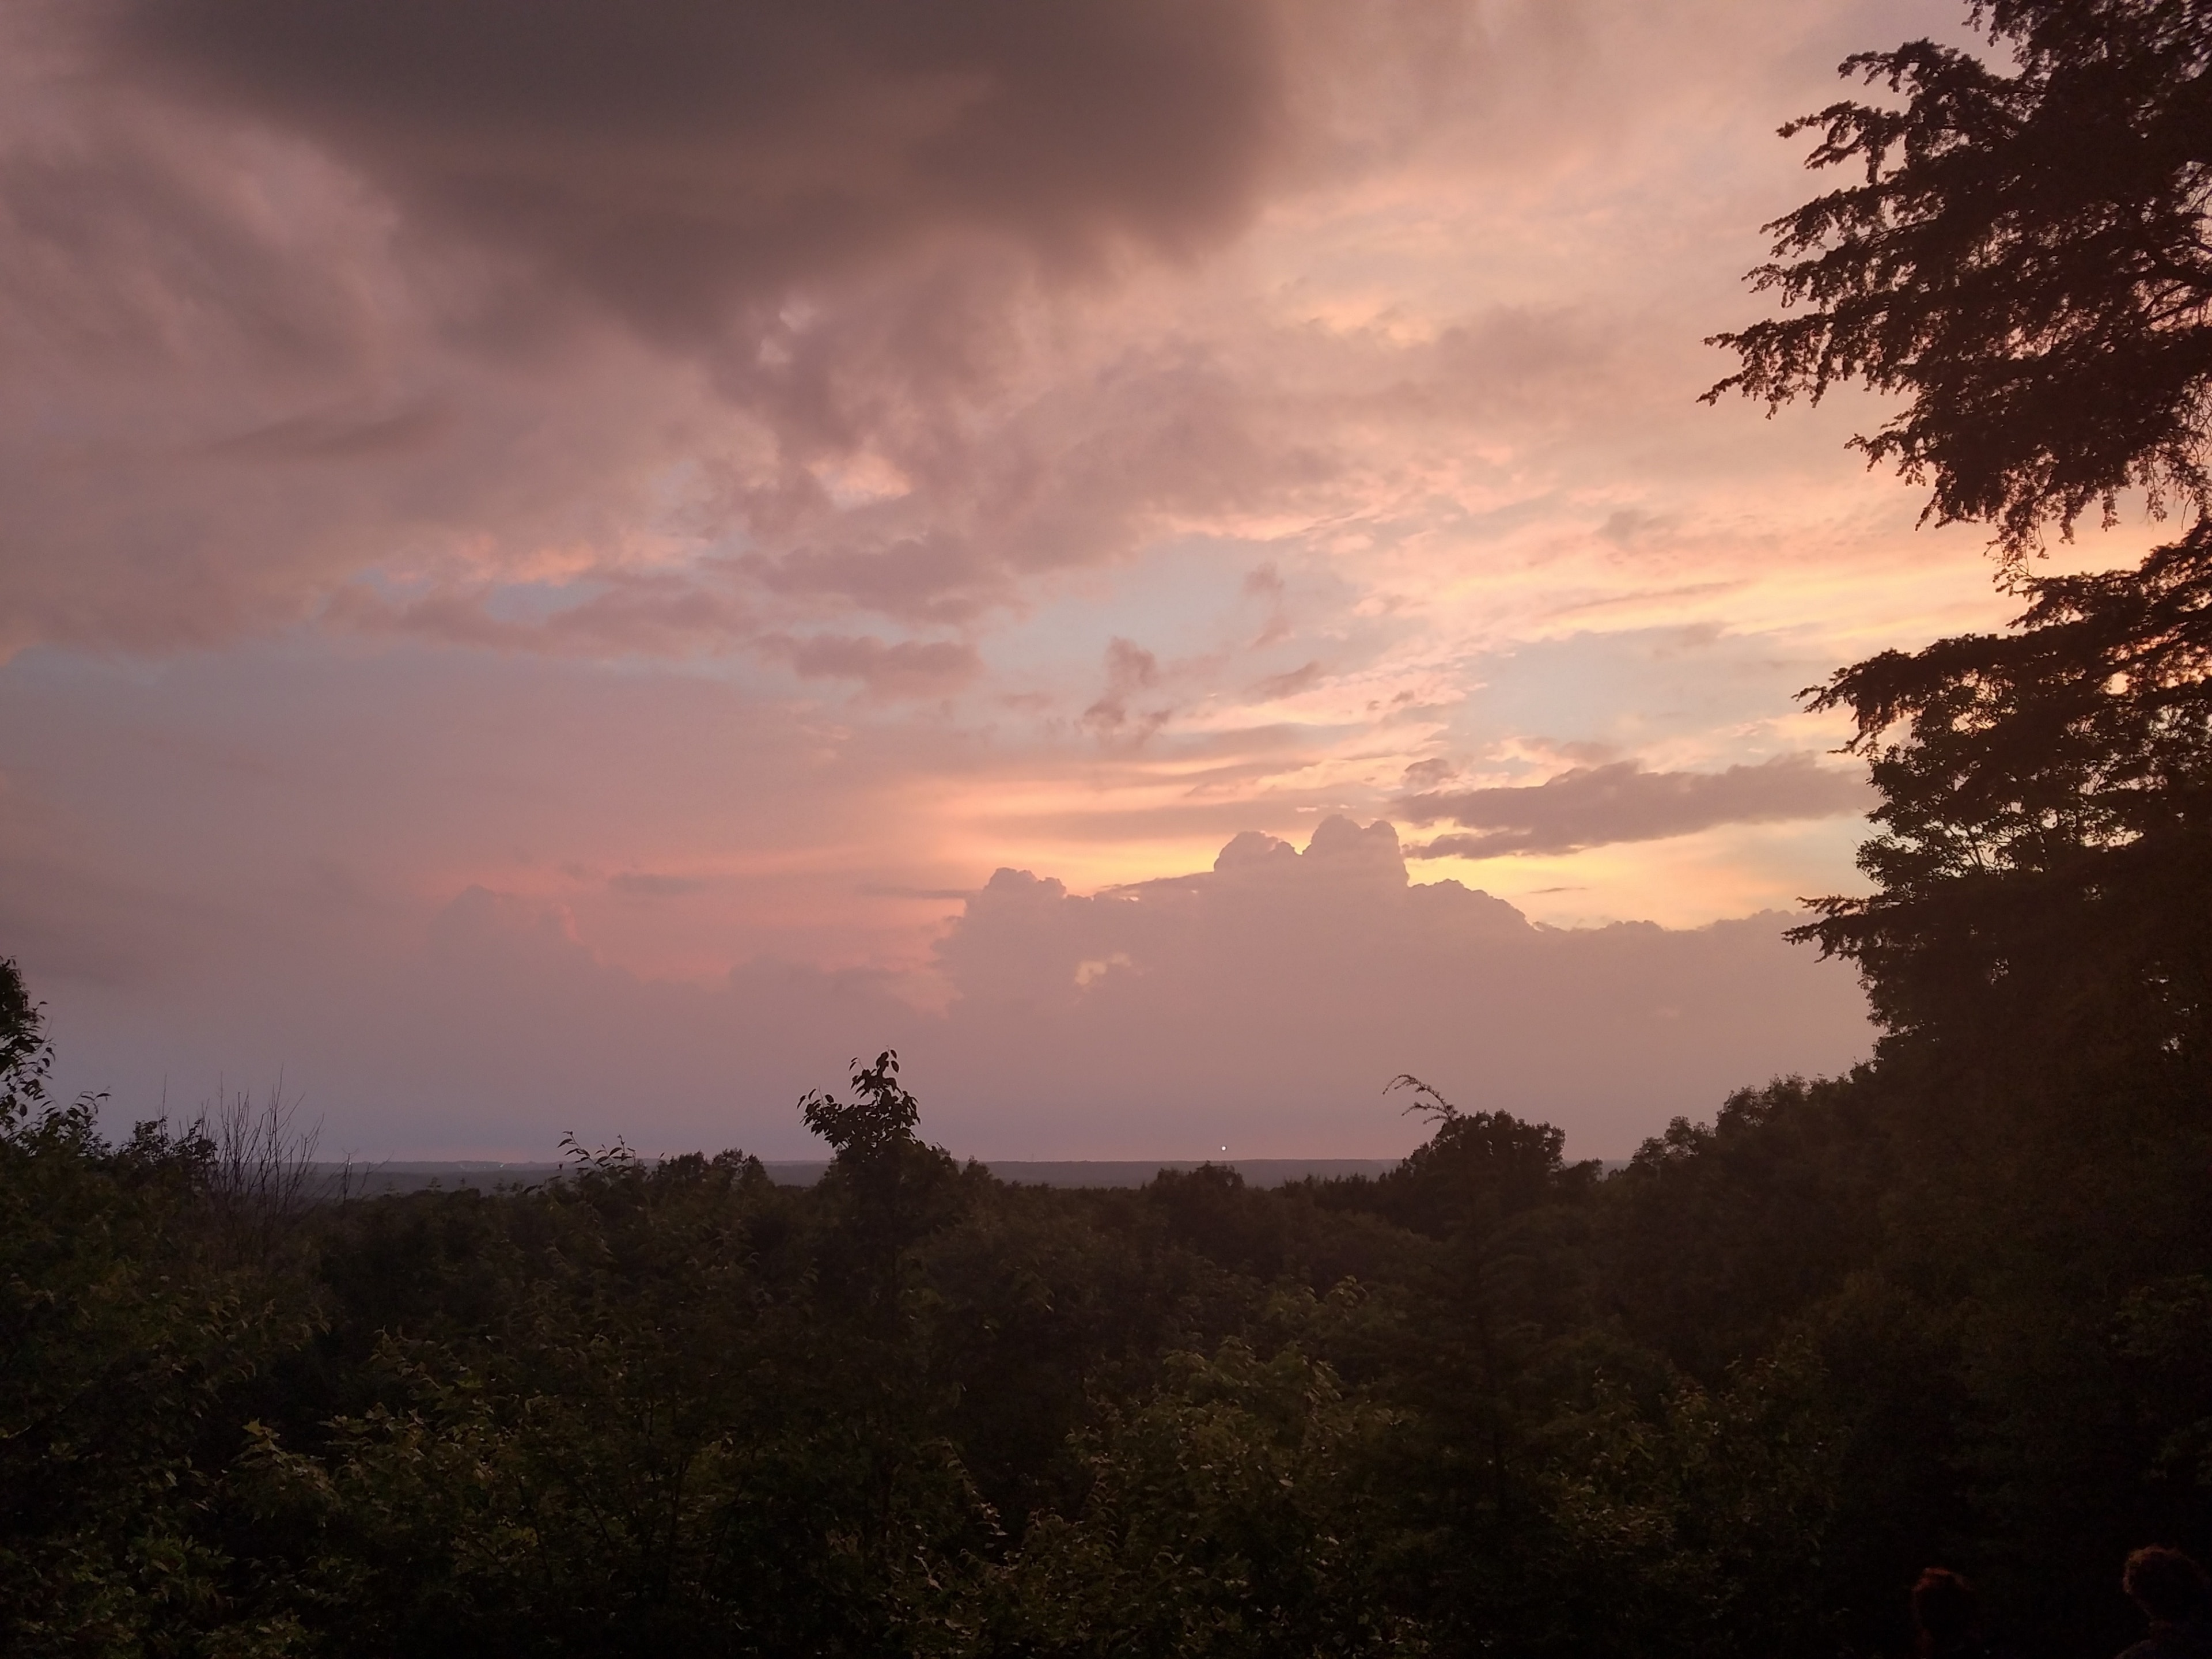 Just another sunset from a great vantage point. The Ledges Overlook. 